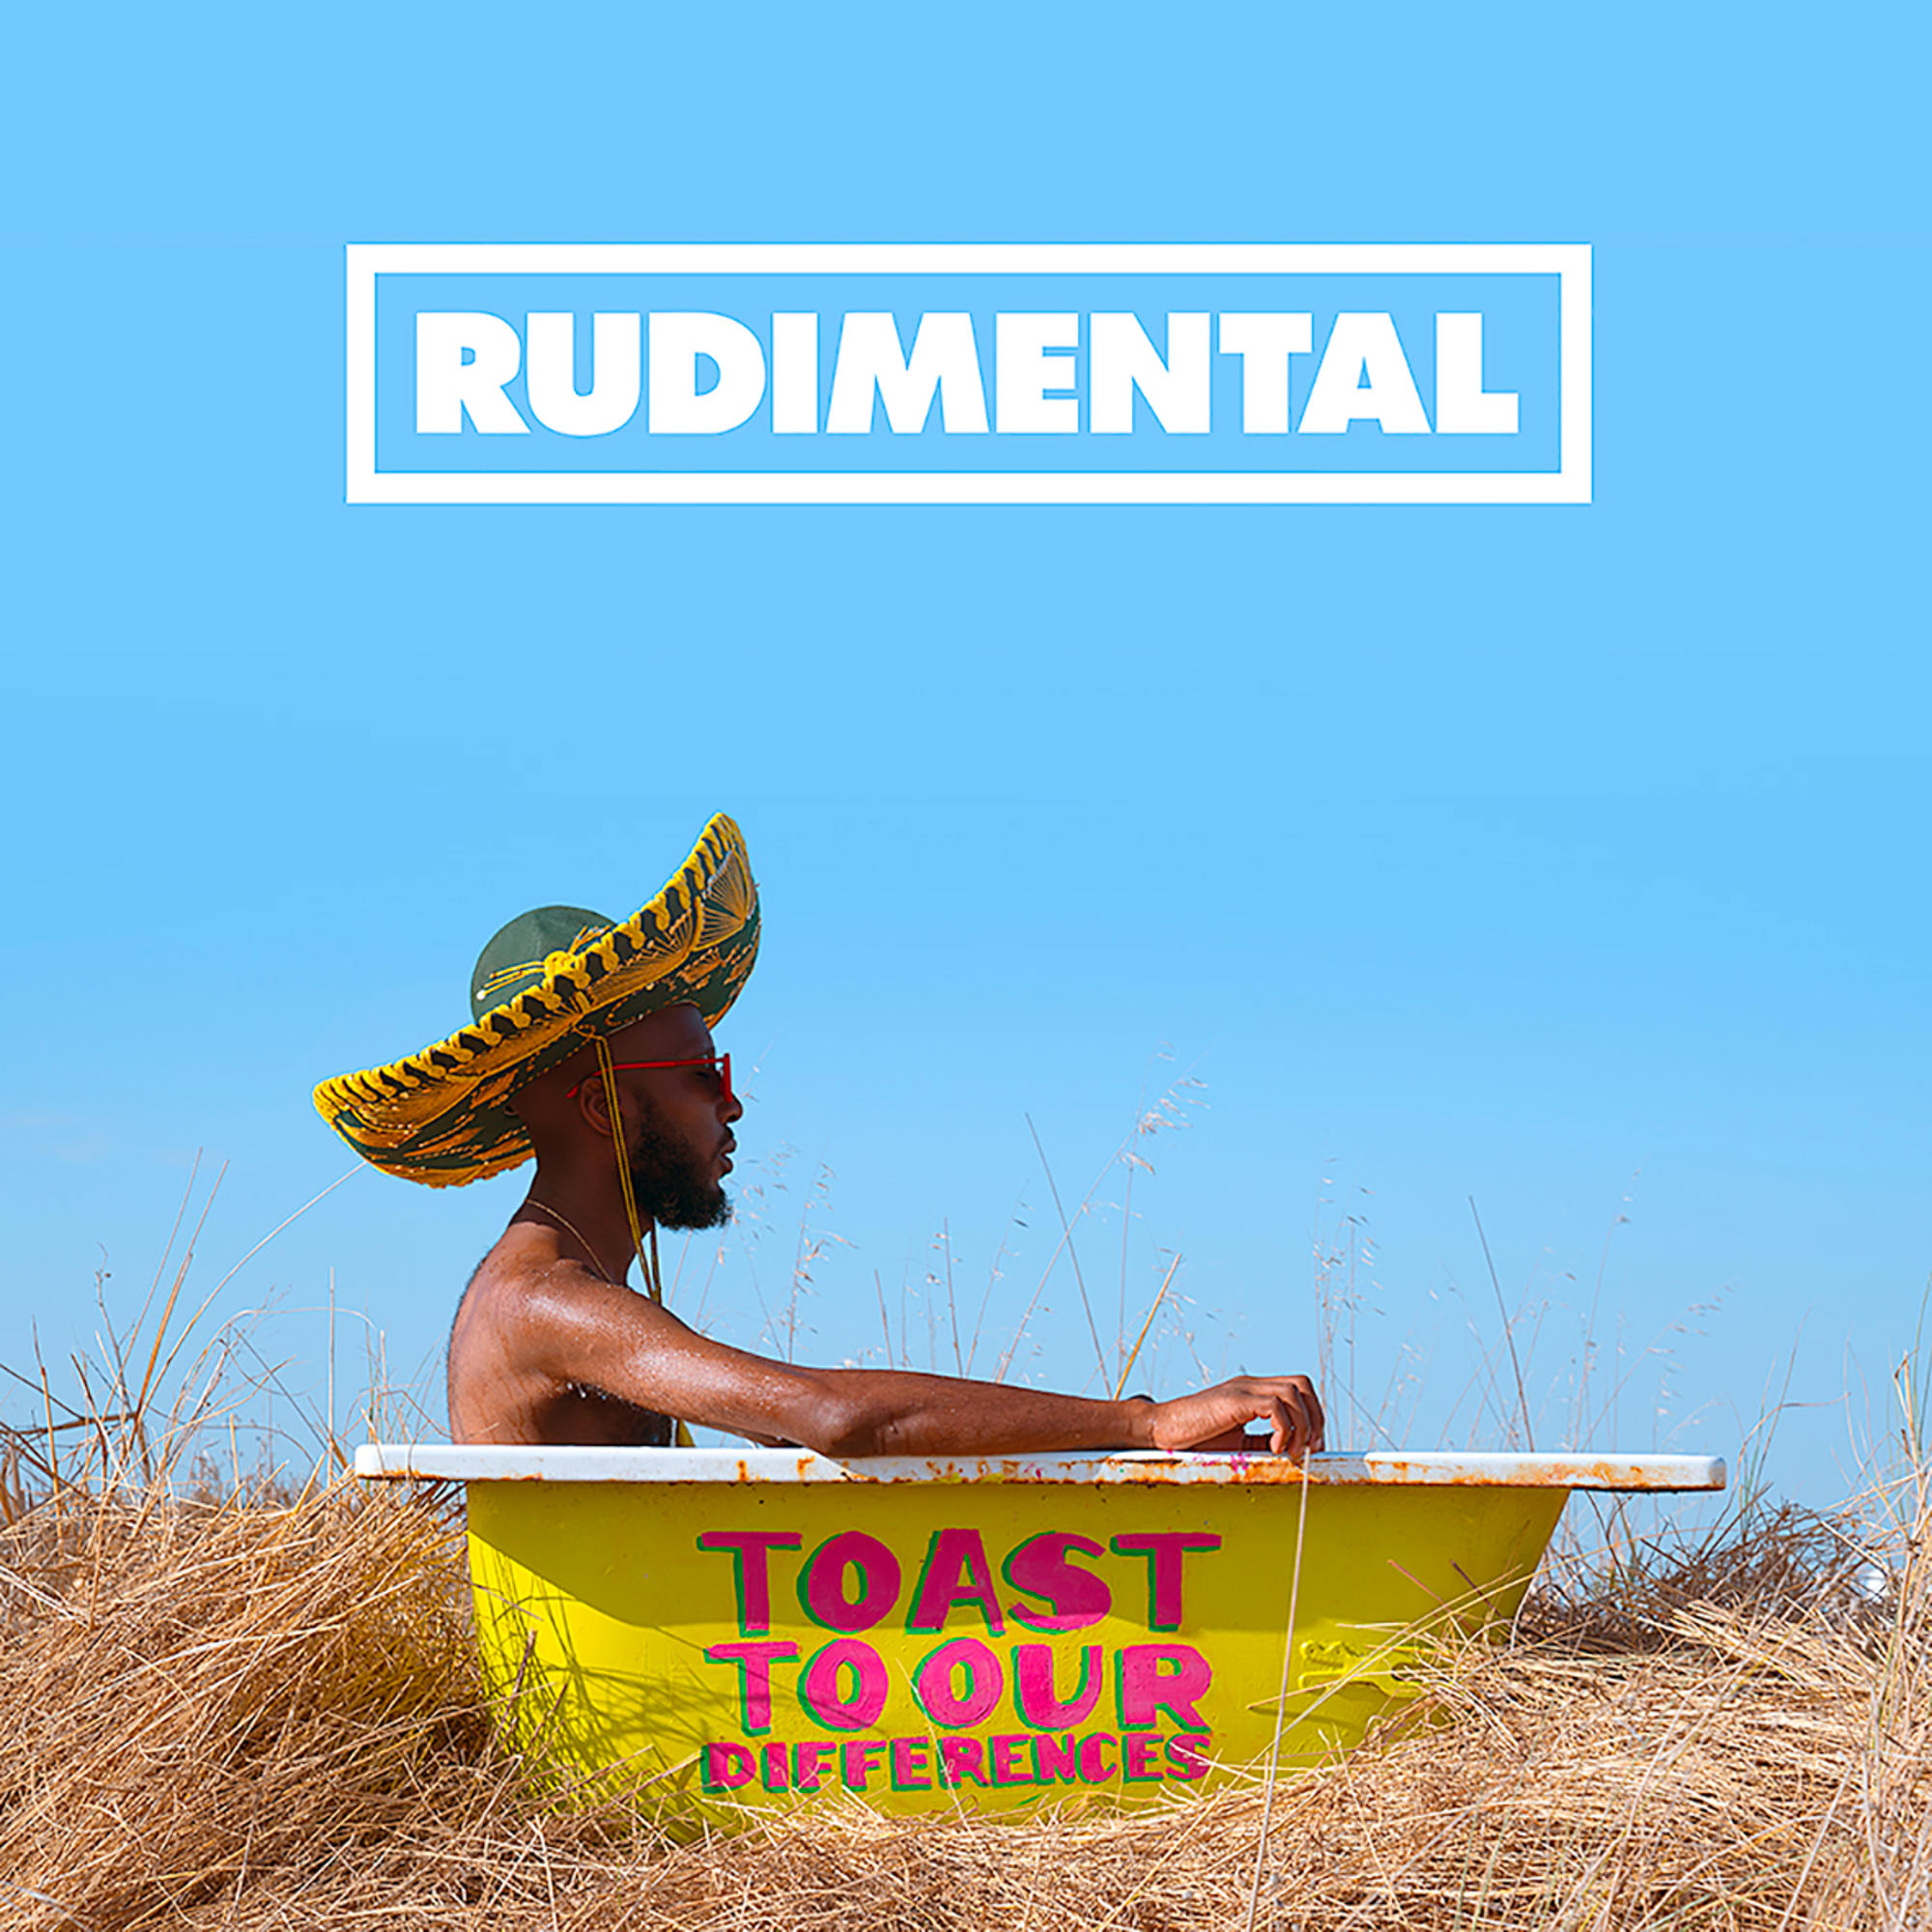 - to Rudimental (CD) Our Toast - Differences